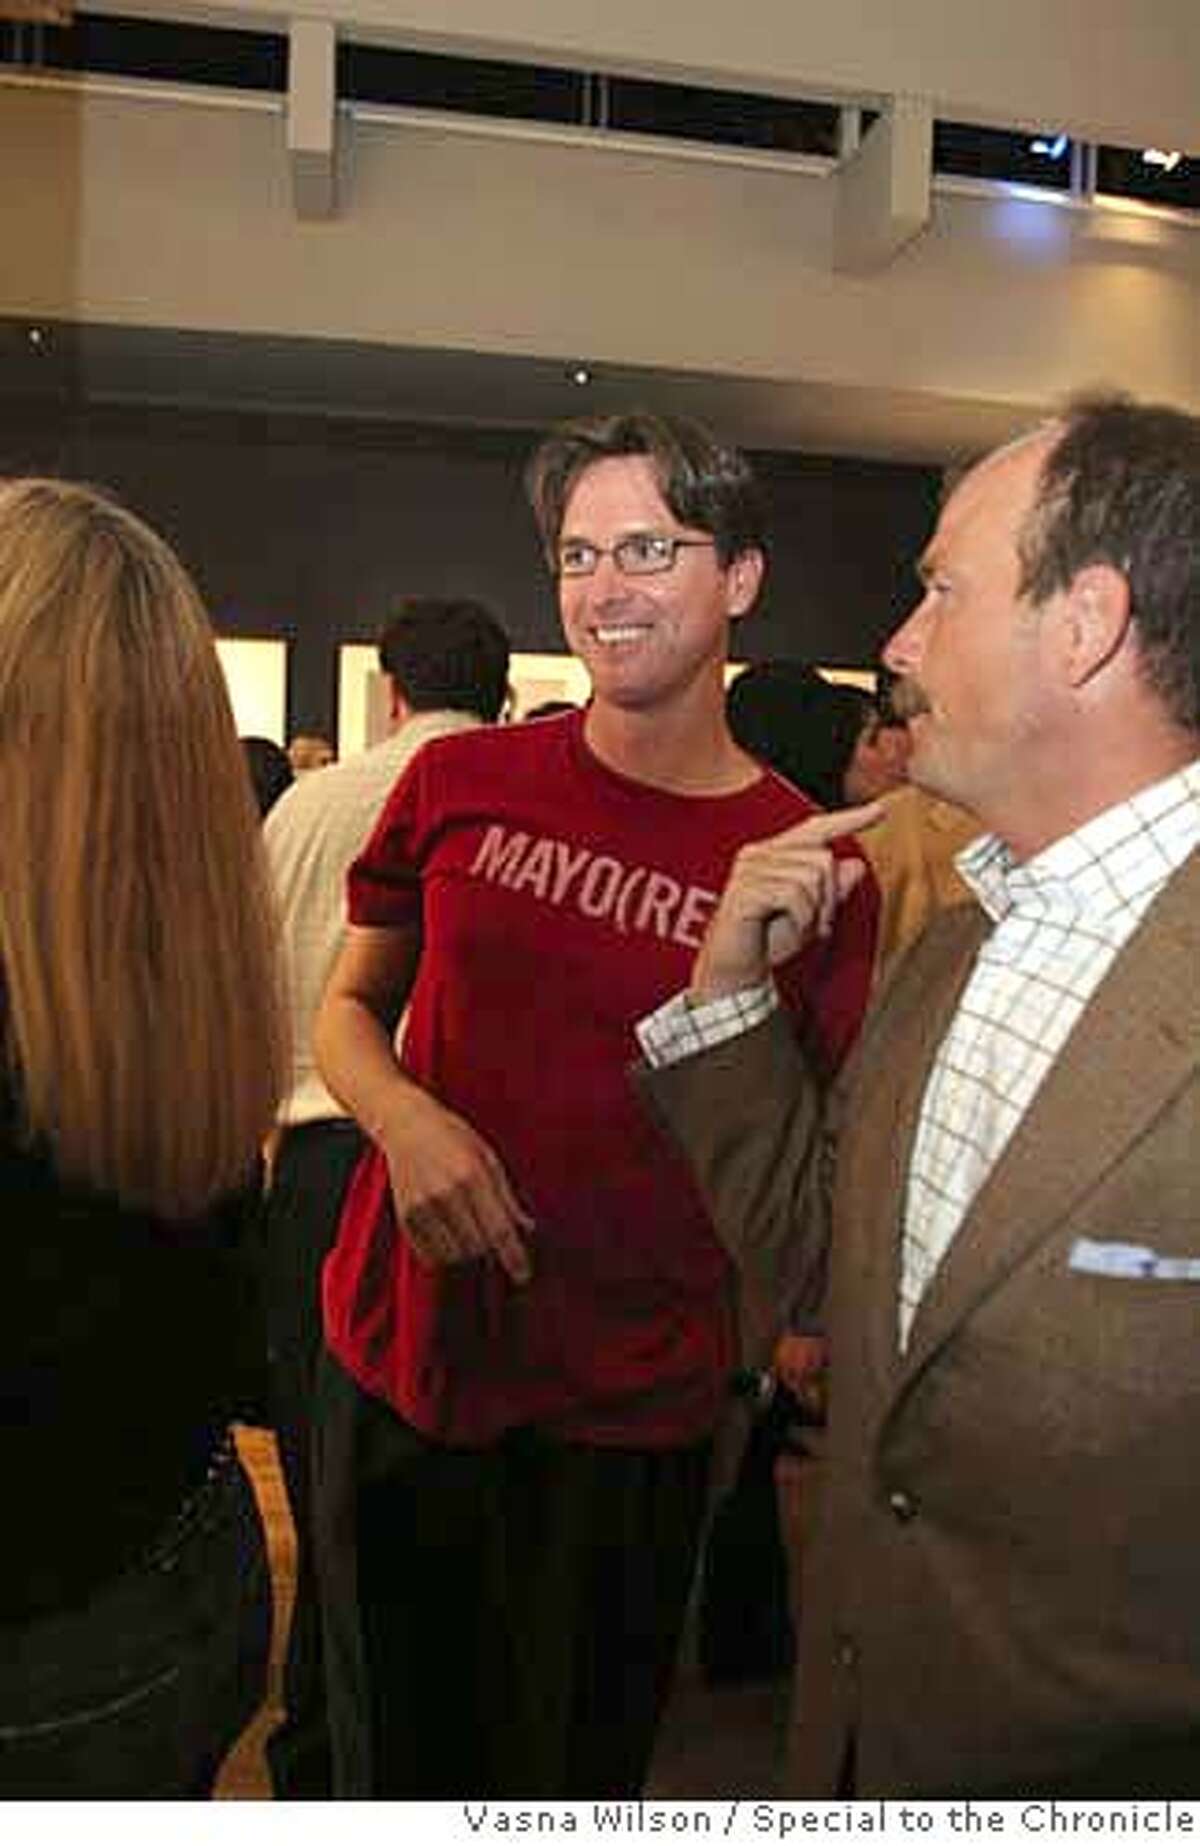 SFIS1606_Gap FOR USE WITH 10/8/06 MATIER AND ROSS...M&R WOULD LIKE THE PHOTO CROPPED IN TO EMPHASIZE GAVIN'S HAIR. San Francisco, CA - Mayor Gavin Newsom attended the Gap's opening night of a new photo exhibit of portraits taken by famous fashion photographers that were in Gap ads at the Yerba Buena Center for the Arts in downtown San Francisco, Tuesday, Oct. 3, 2006. Opening night party co-sponsored by Vanity Fair. (Vasna Wilson/Special to the Chronicle) Mantory credit for photographer, San Francisco Chronicle. Magazine out.